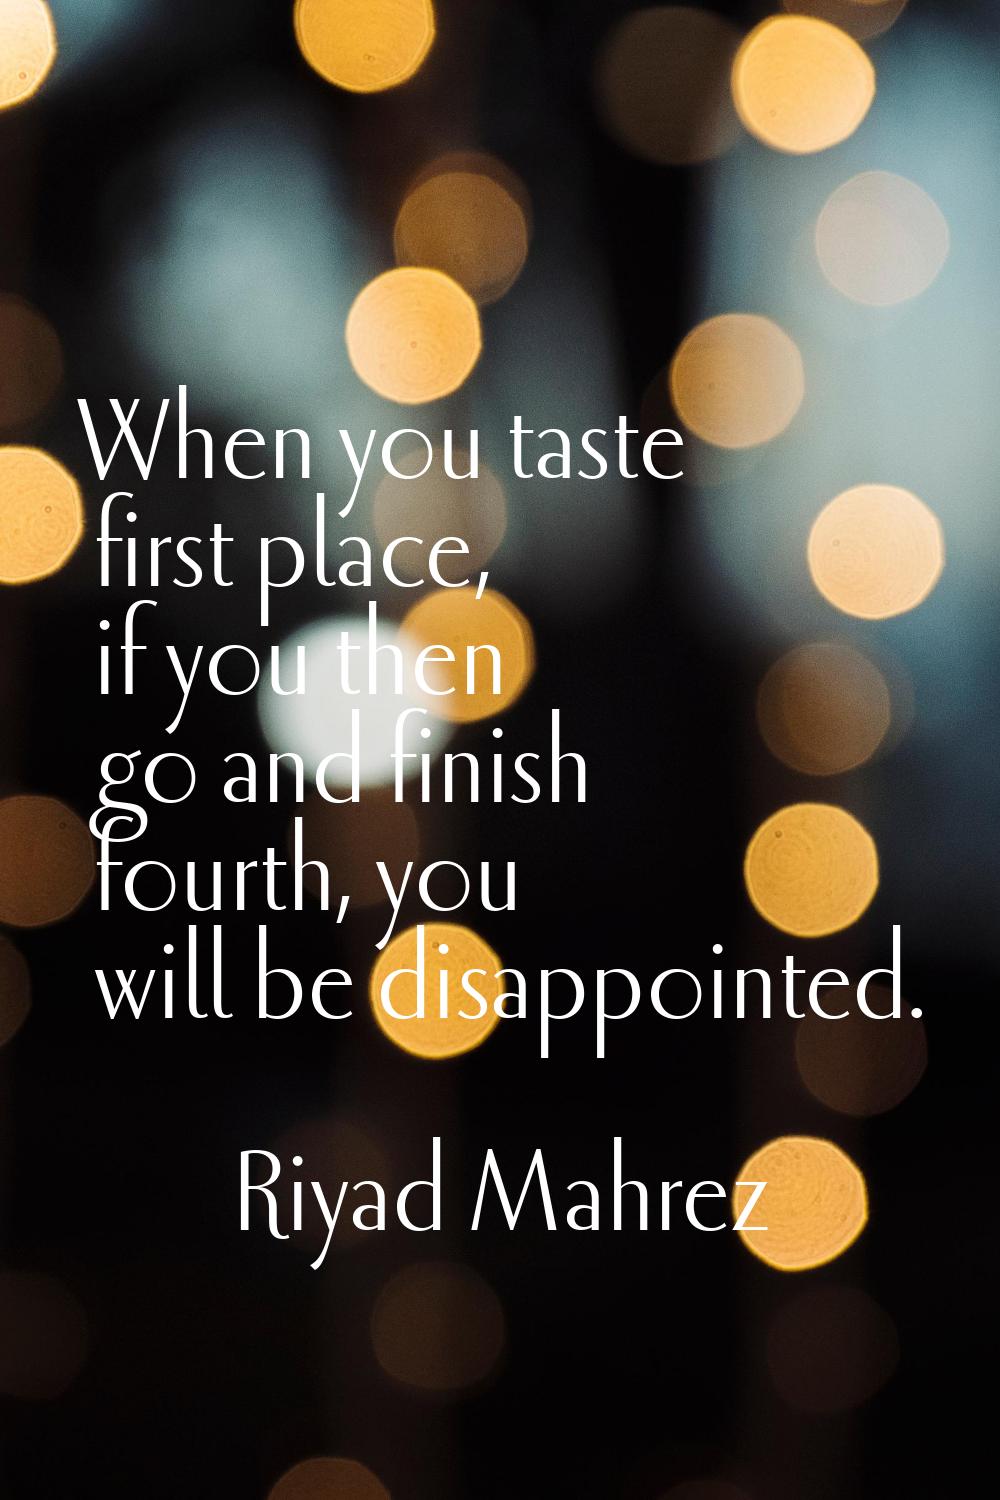 When you taste first place, if you then go and finish fourth, you will be disappointed.